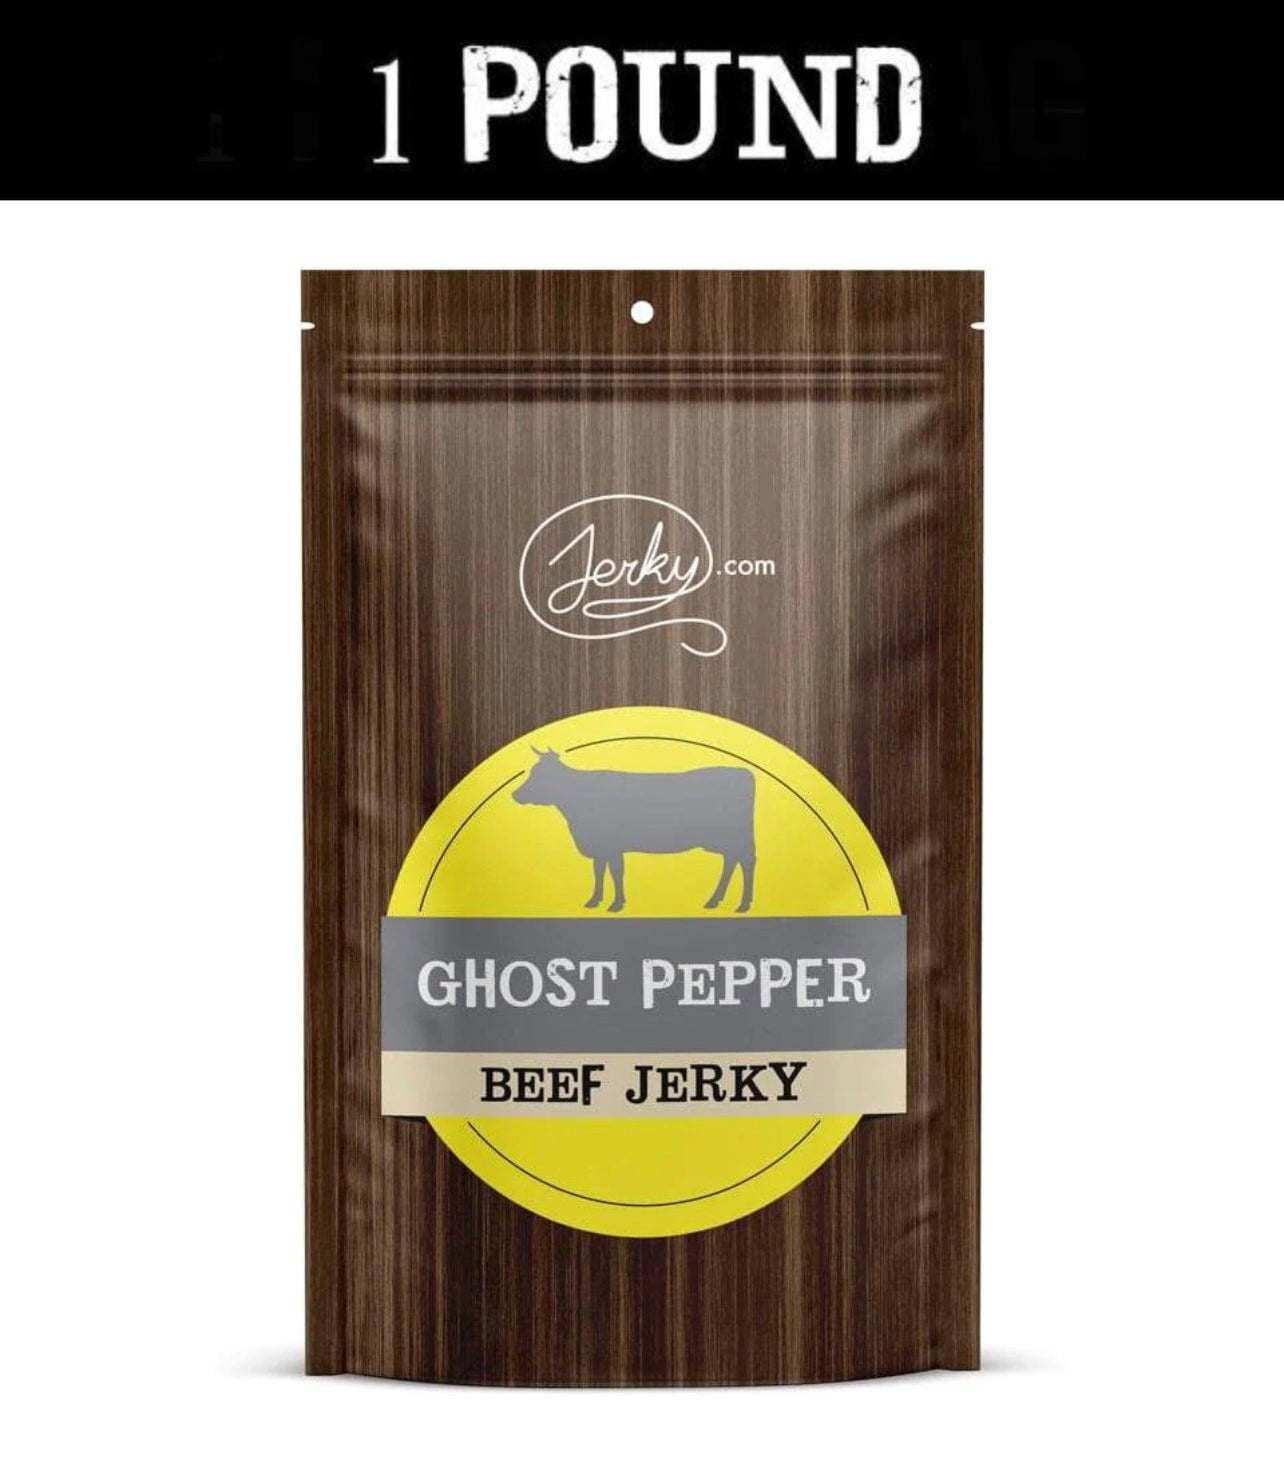 All-Natural Beef Jerky - Ghost Pepper - 1 Pound by Jerky.com